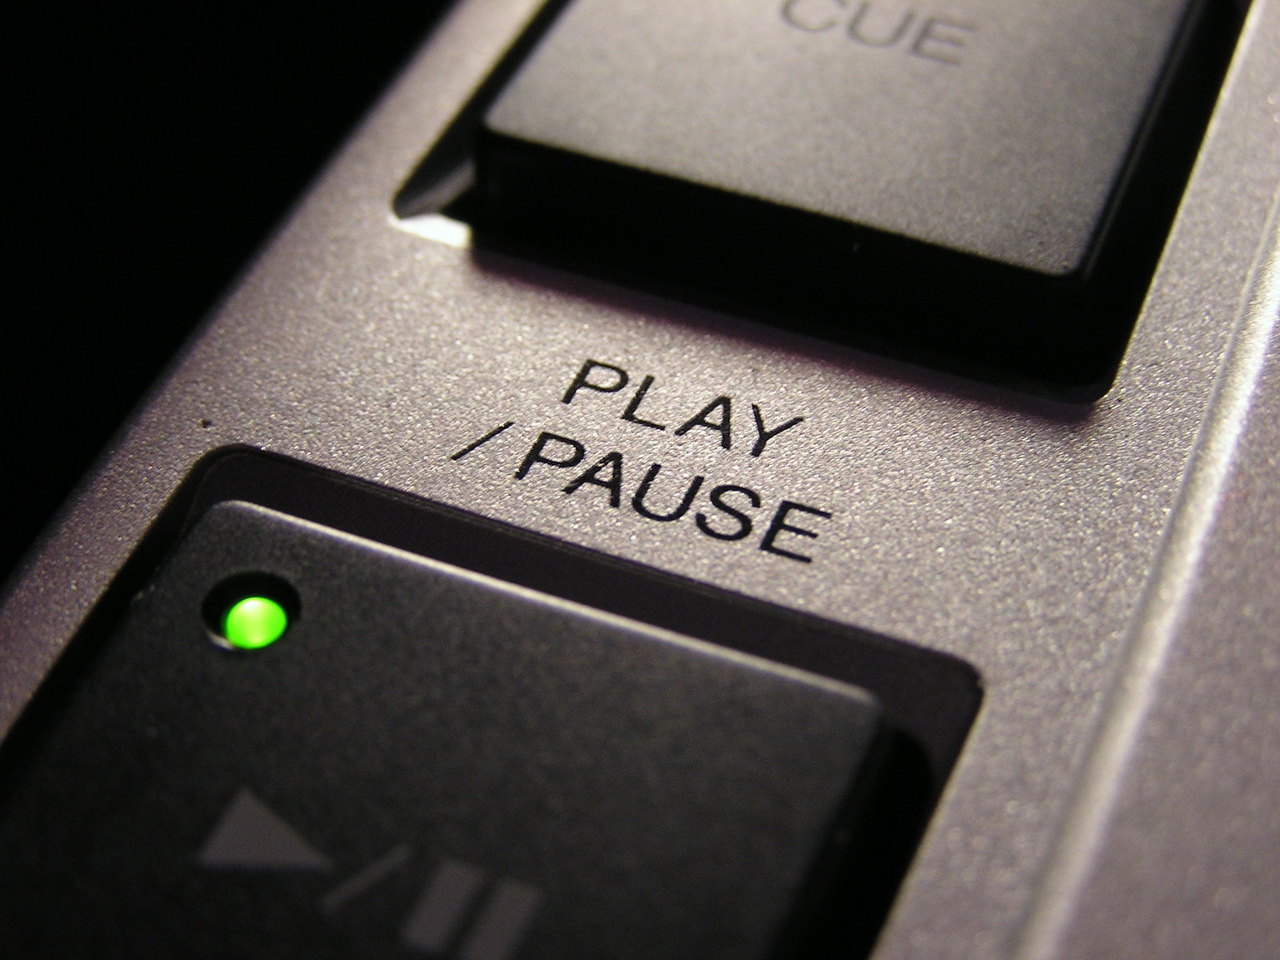 Play/Pause Button Lit Up